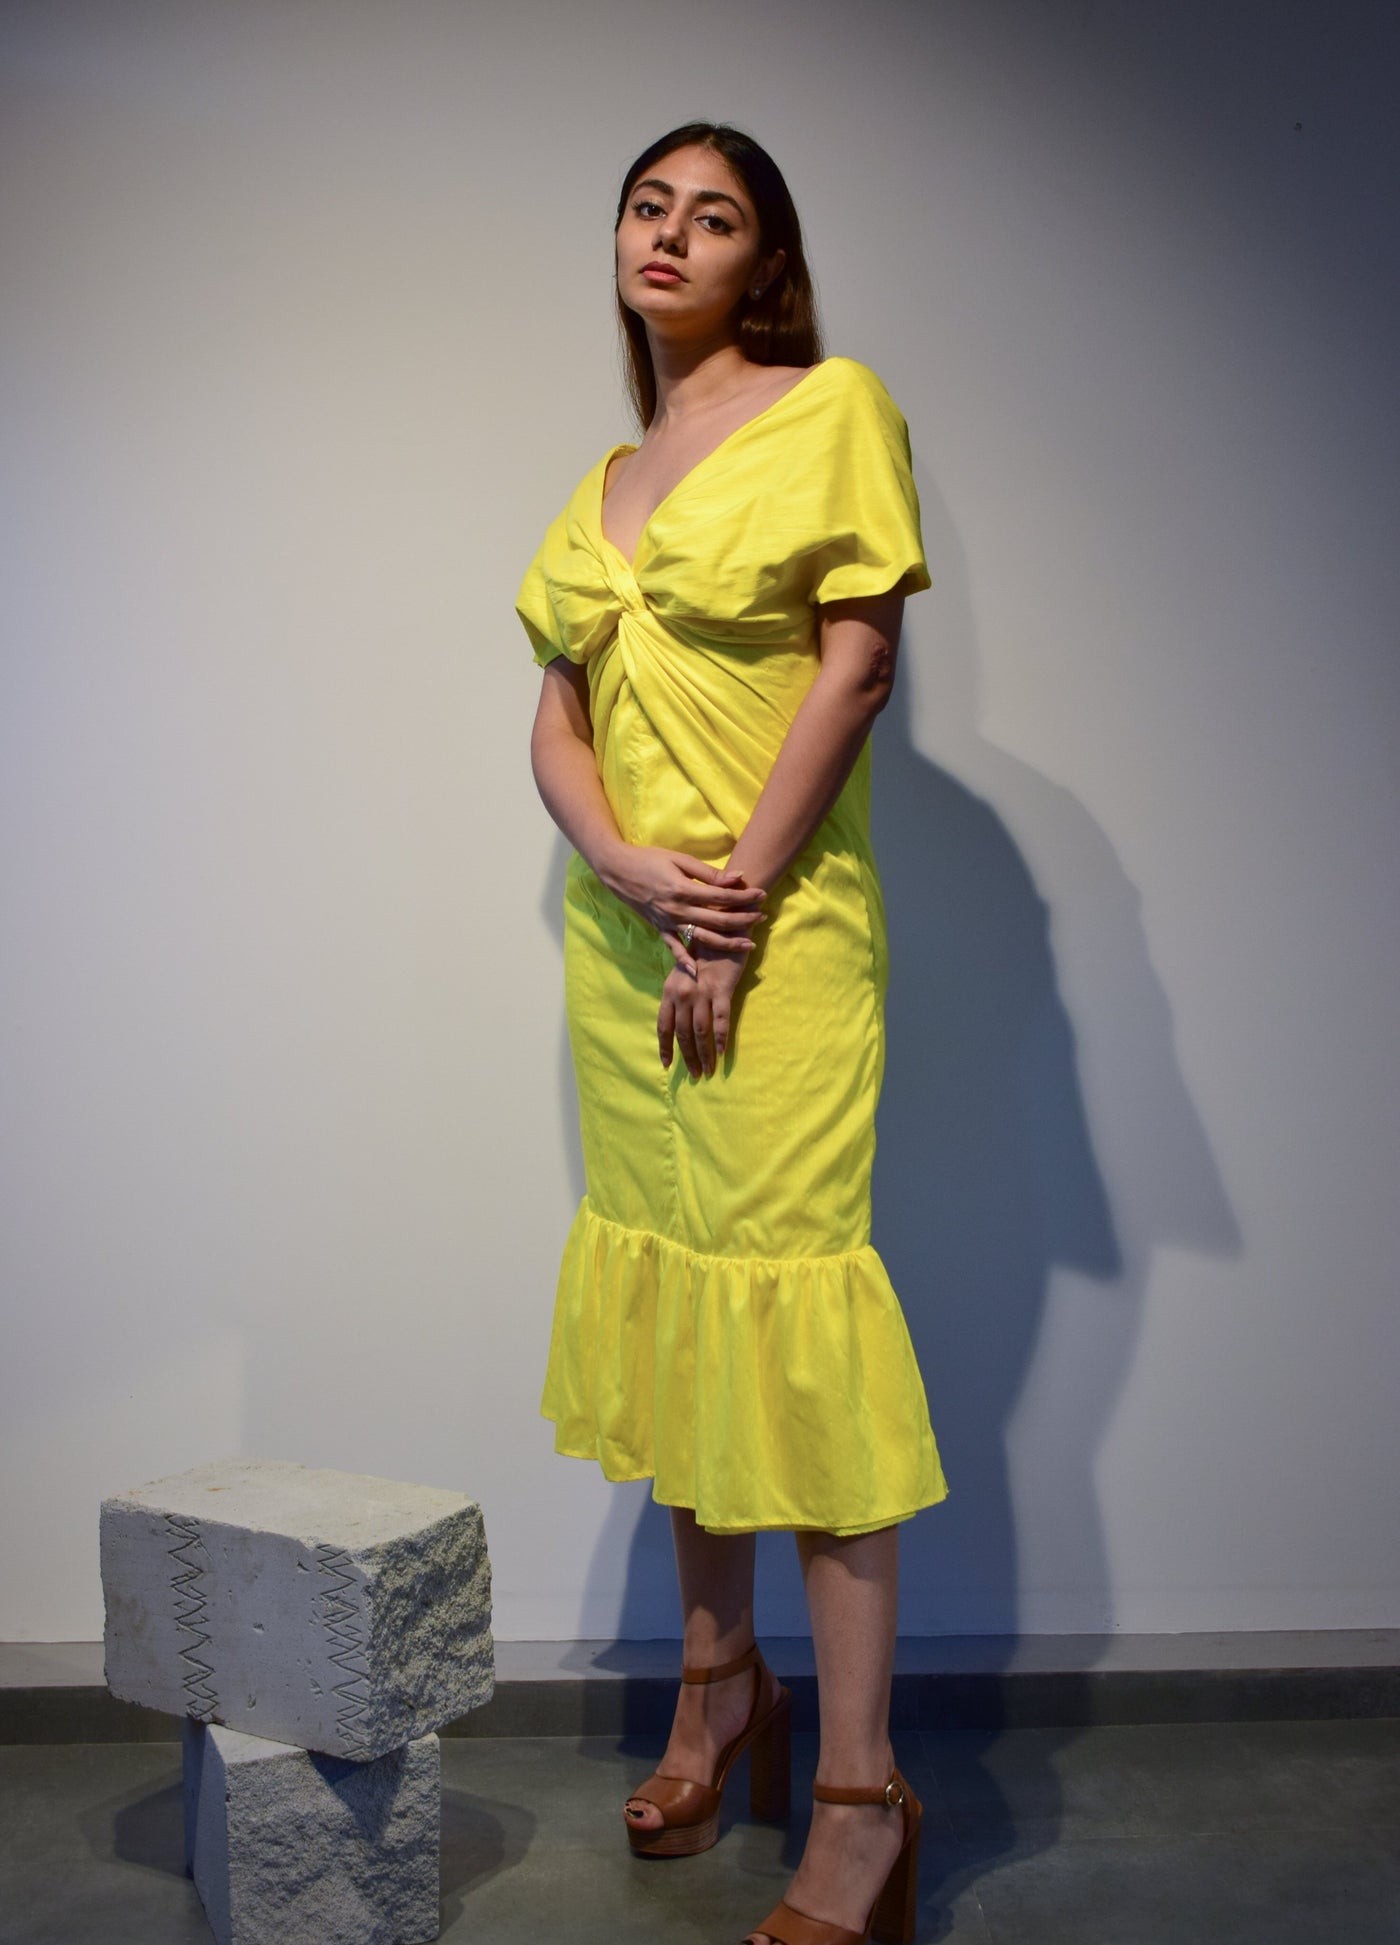 Bright yellow midi dress with a twist drape style at the empire line